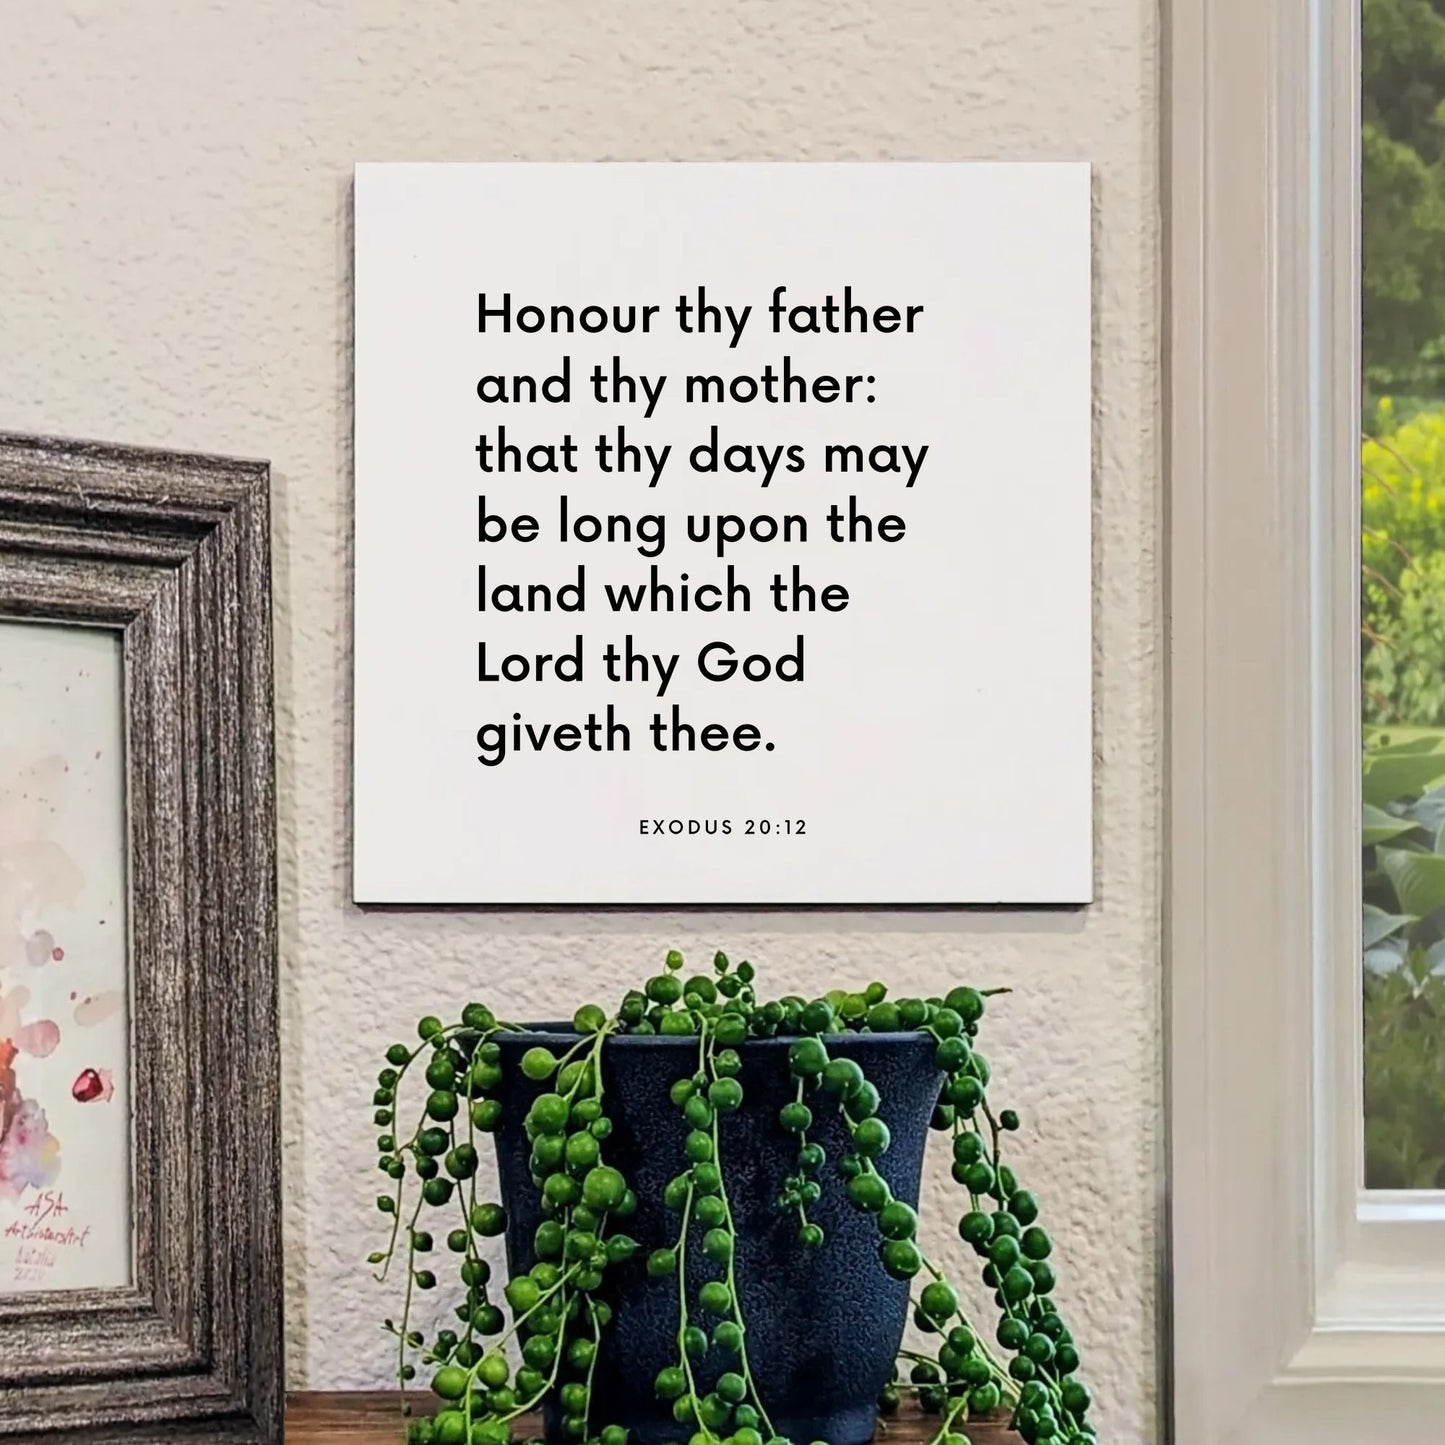 Window mouting of the scripture tile for Exodus 20:12 - "Honour thy father and thy mother"